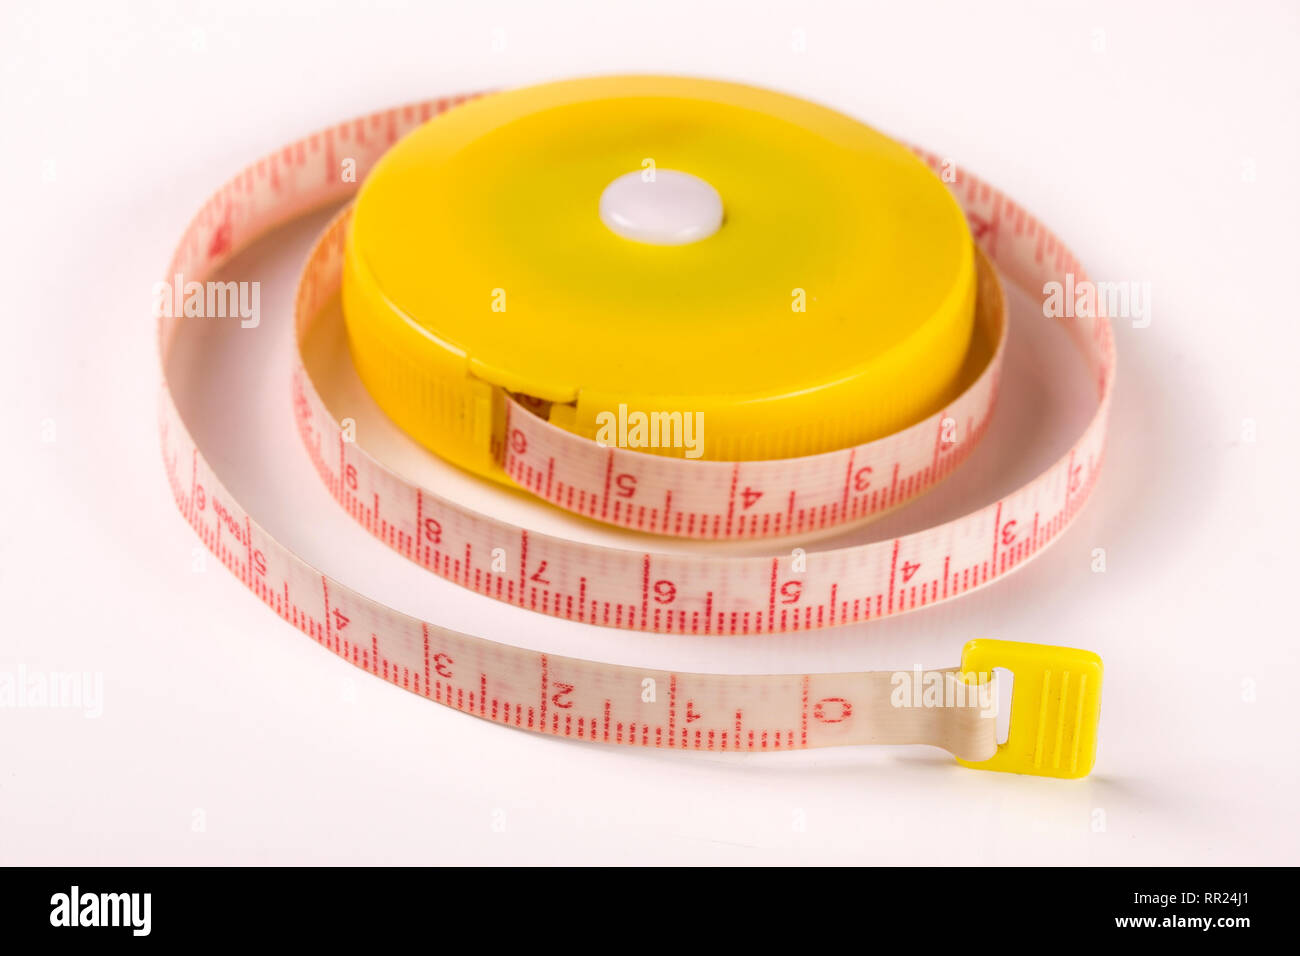 tailor's meter or automatic tape measure isolated on a white background Stock Photo